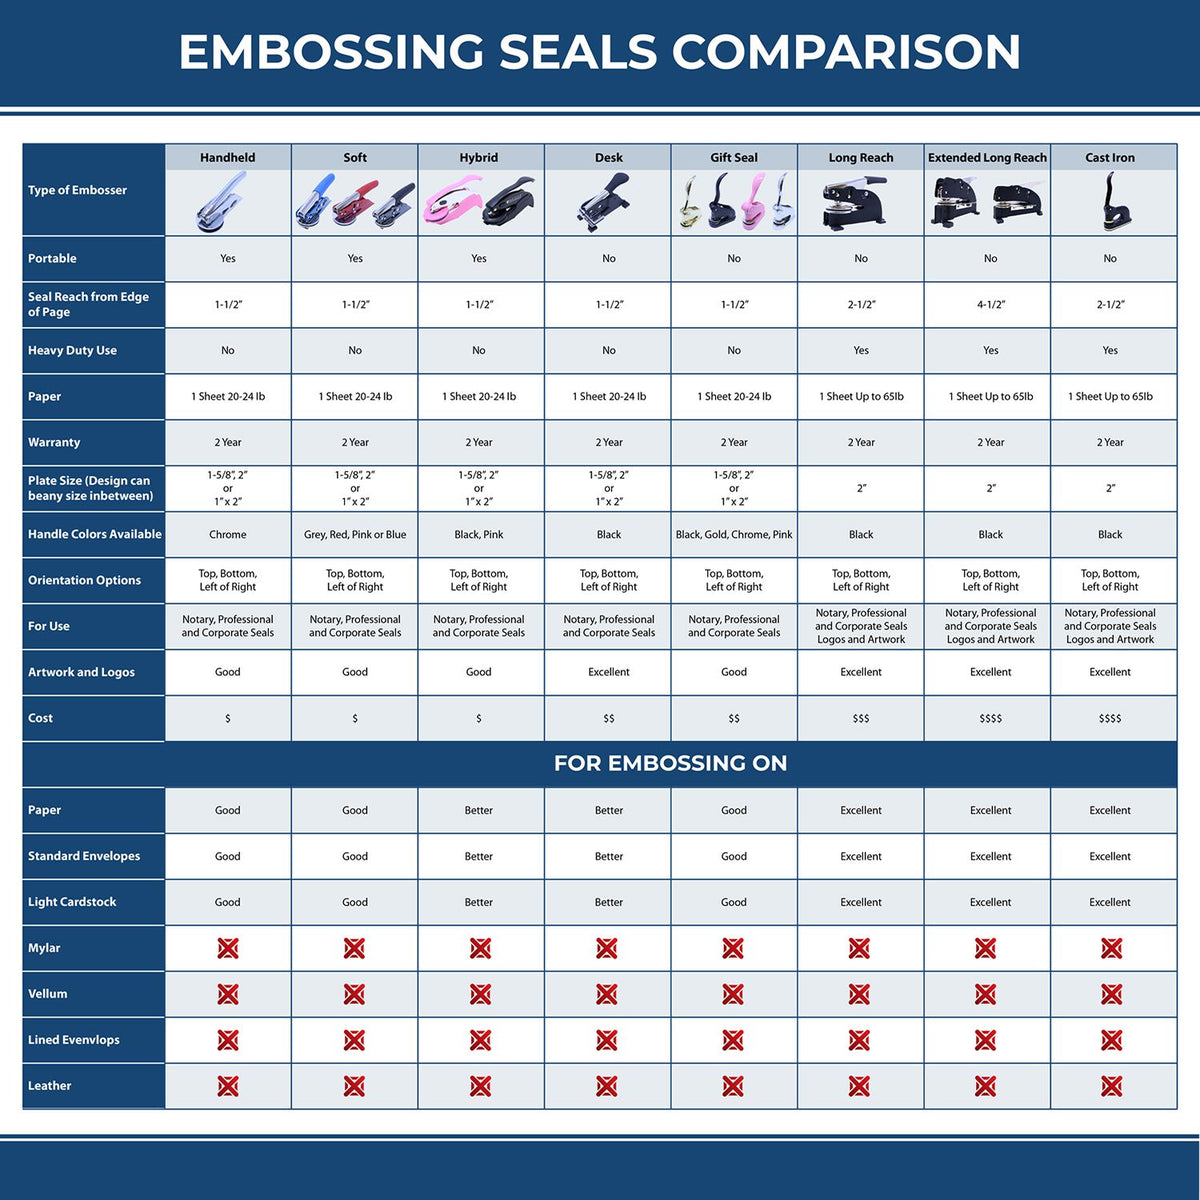 A comparison chart for the different types of mount models available for the Heavy Duty Cast Iron Georgia Engineer Seal Embosser.